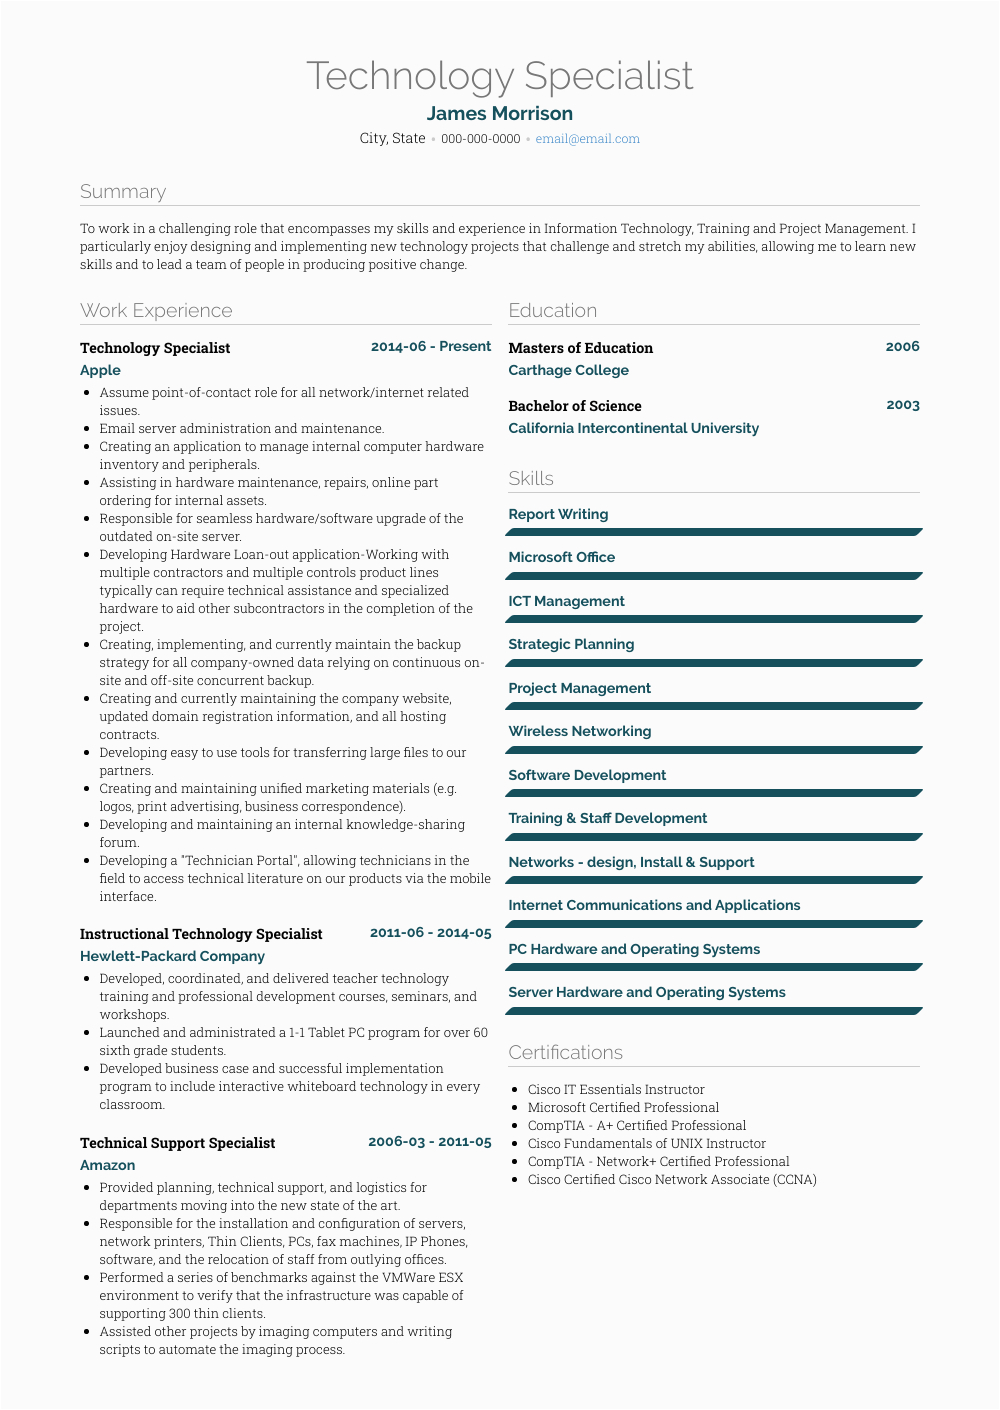 Sample Resume for Information Technology Specialist Information Technology Specialist Resume Samples and